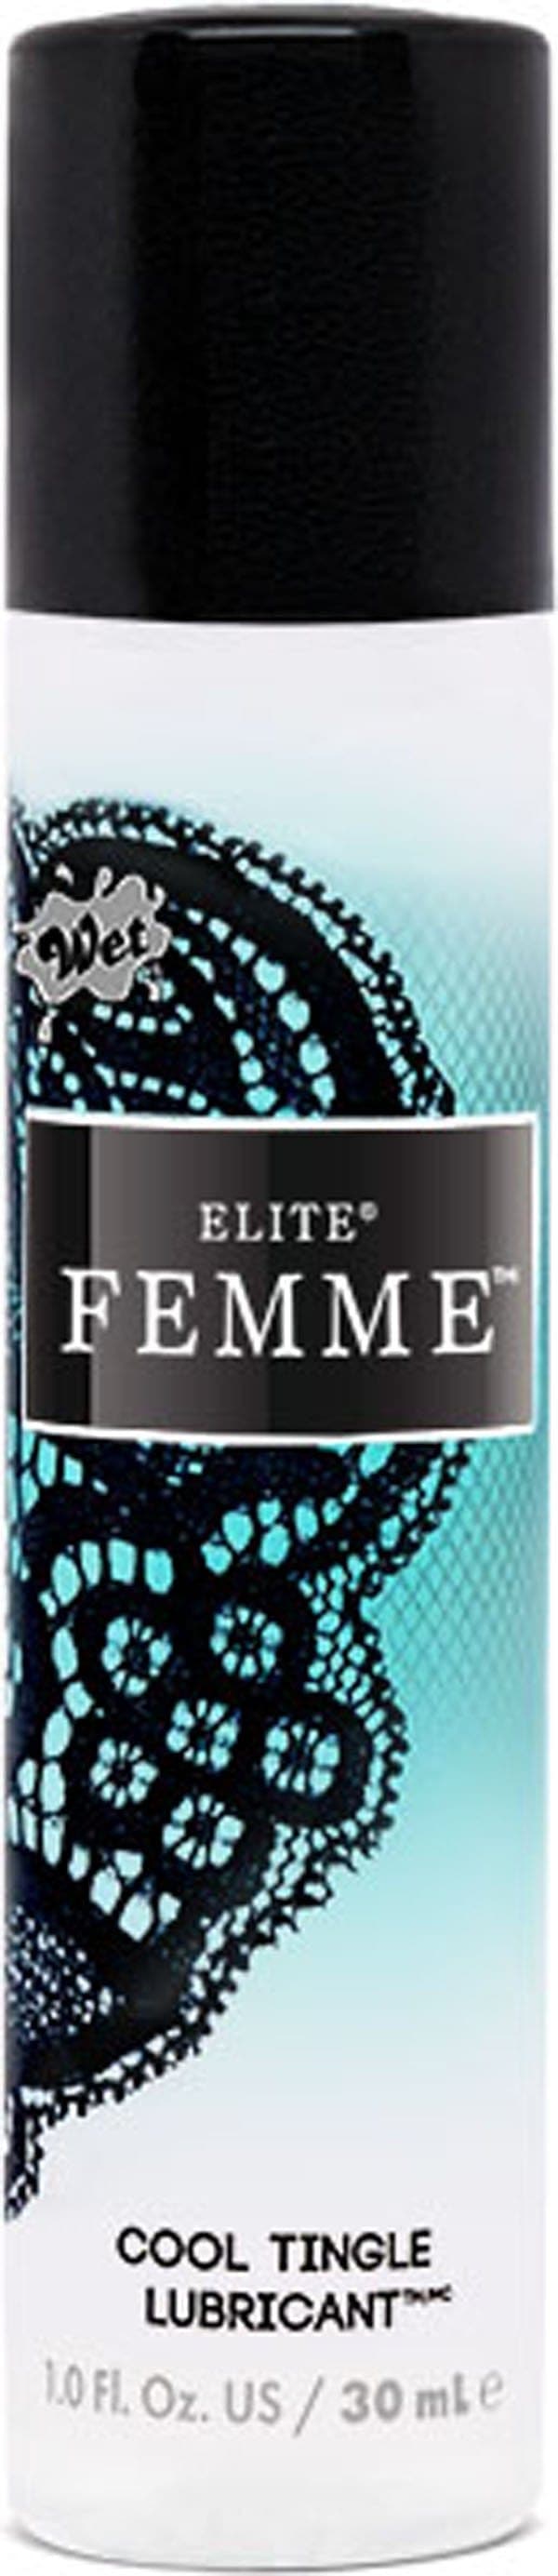 wet femme water silicone blend cool tingle 1 fl oz